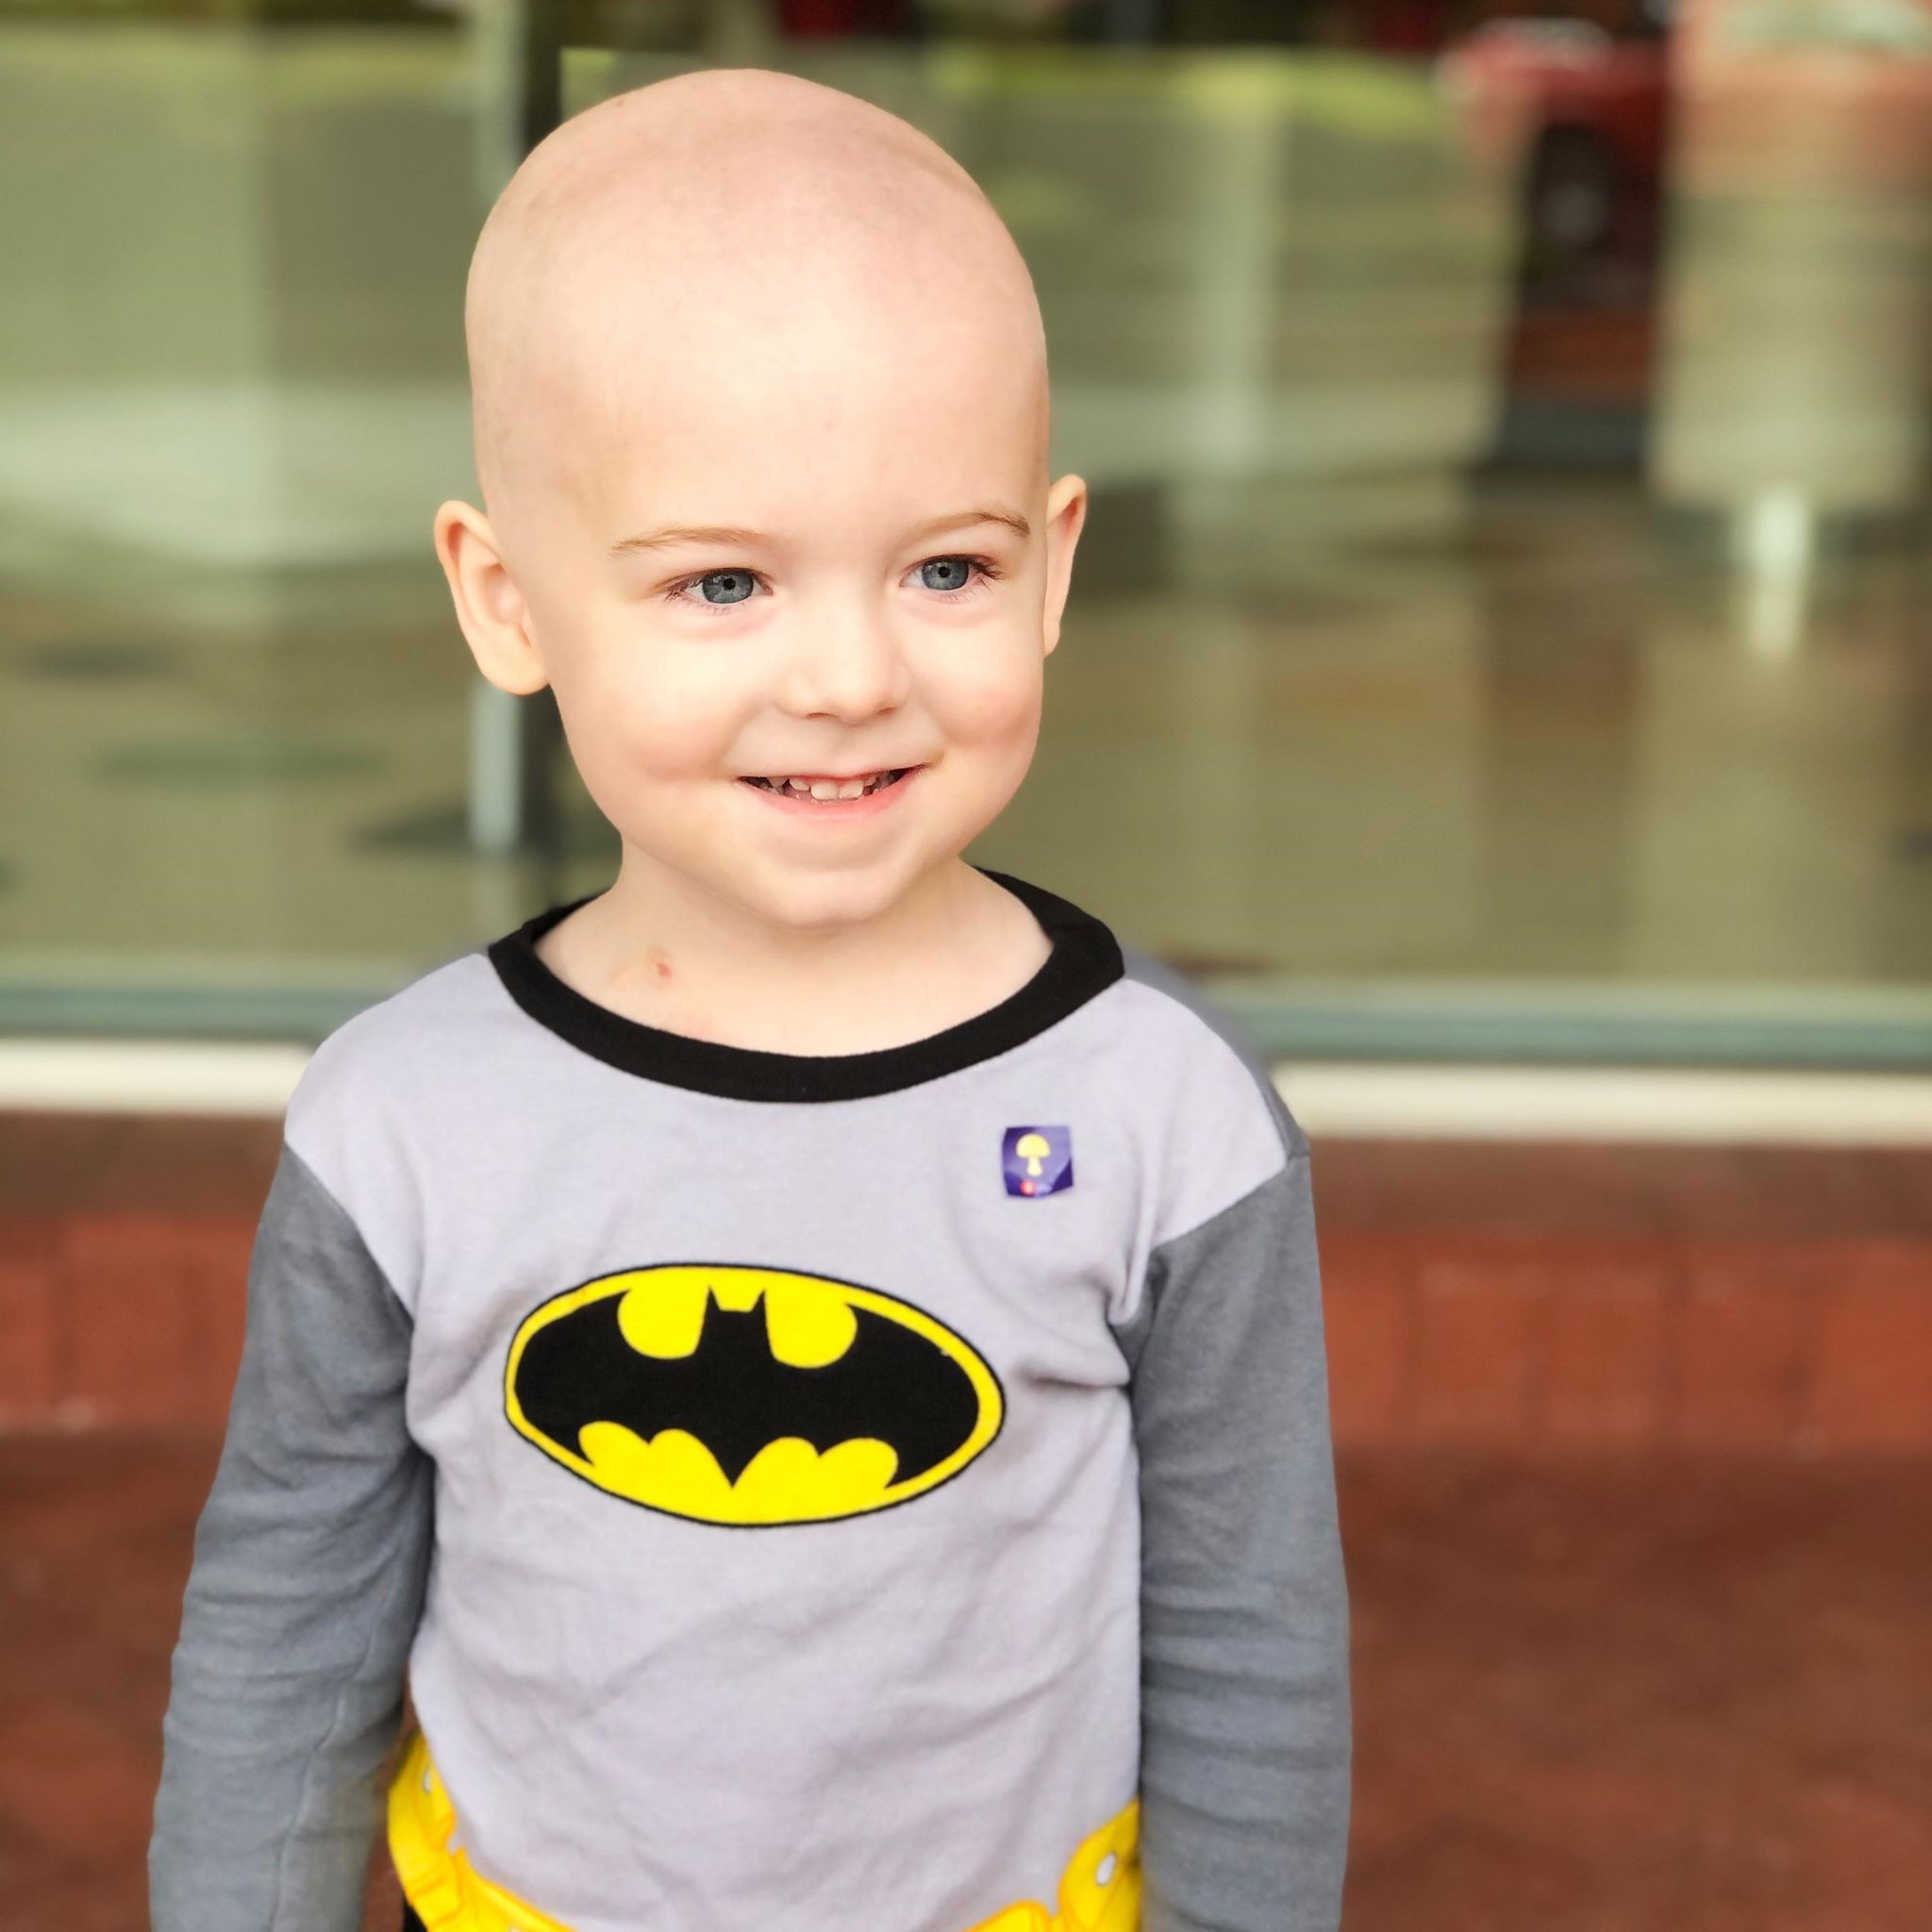 How 4-year-old lymphoma patient is adjusting to being home after months ...